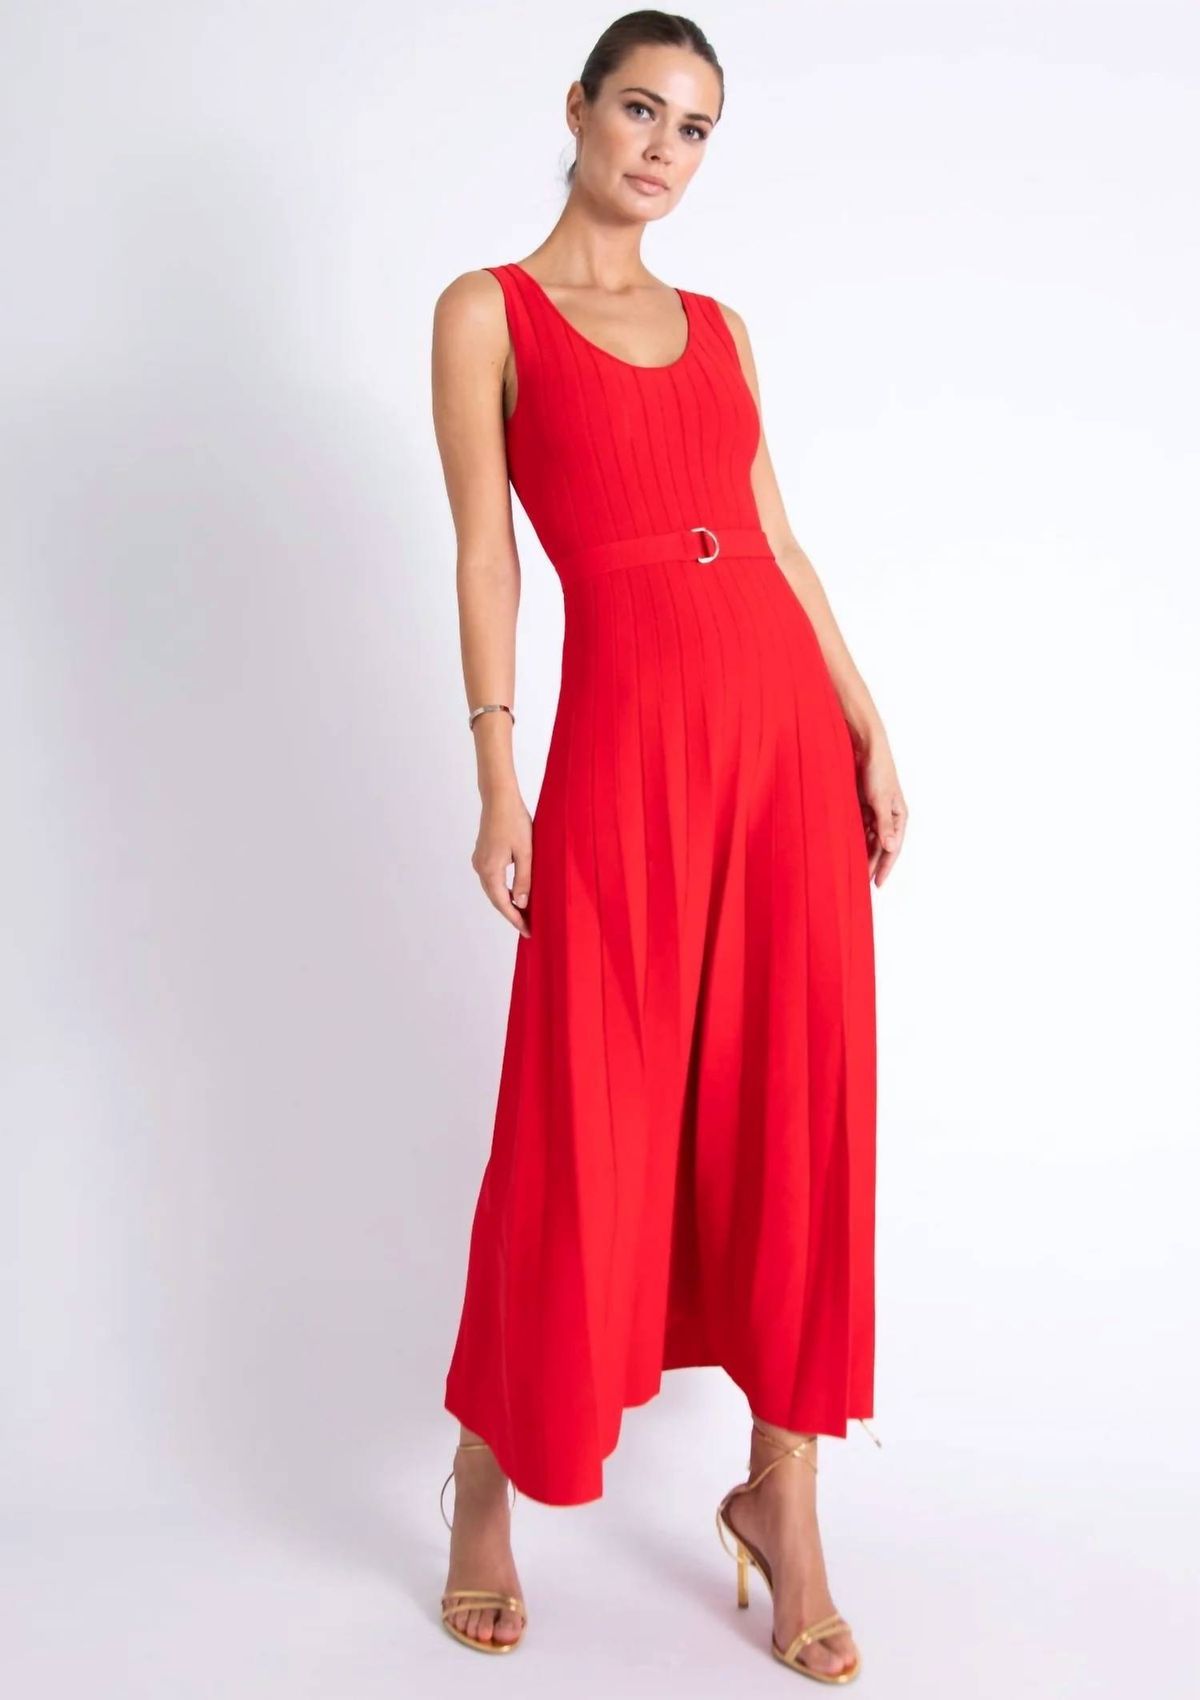 Style 1-2525920861-2901 Karina Grimaldi Size M Red Cocktail Dress on Queenly